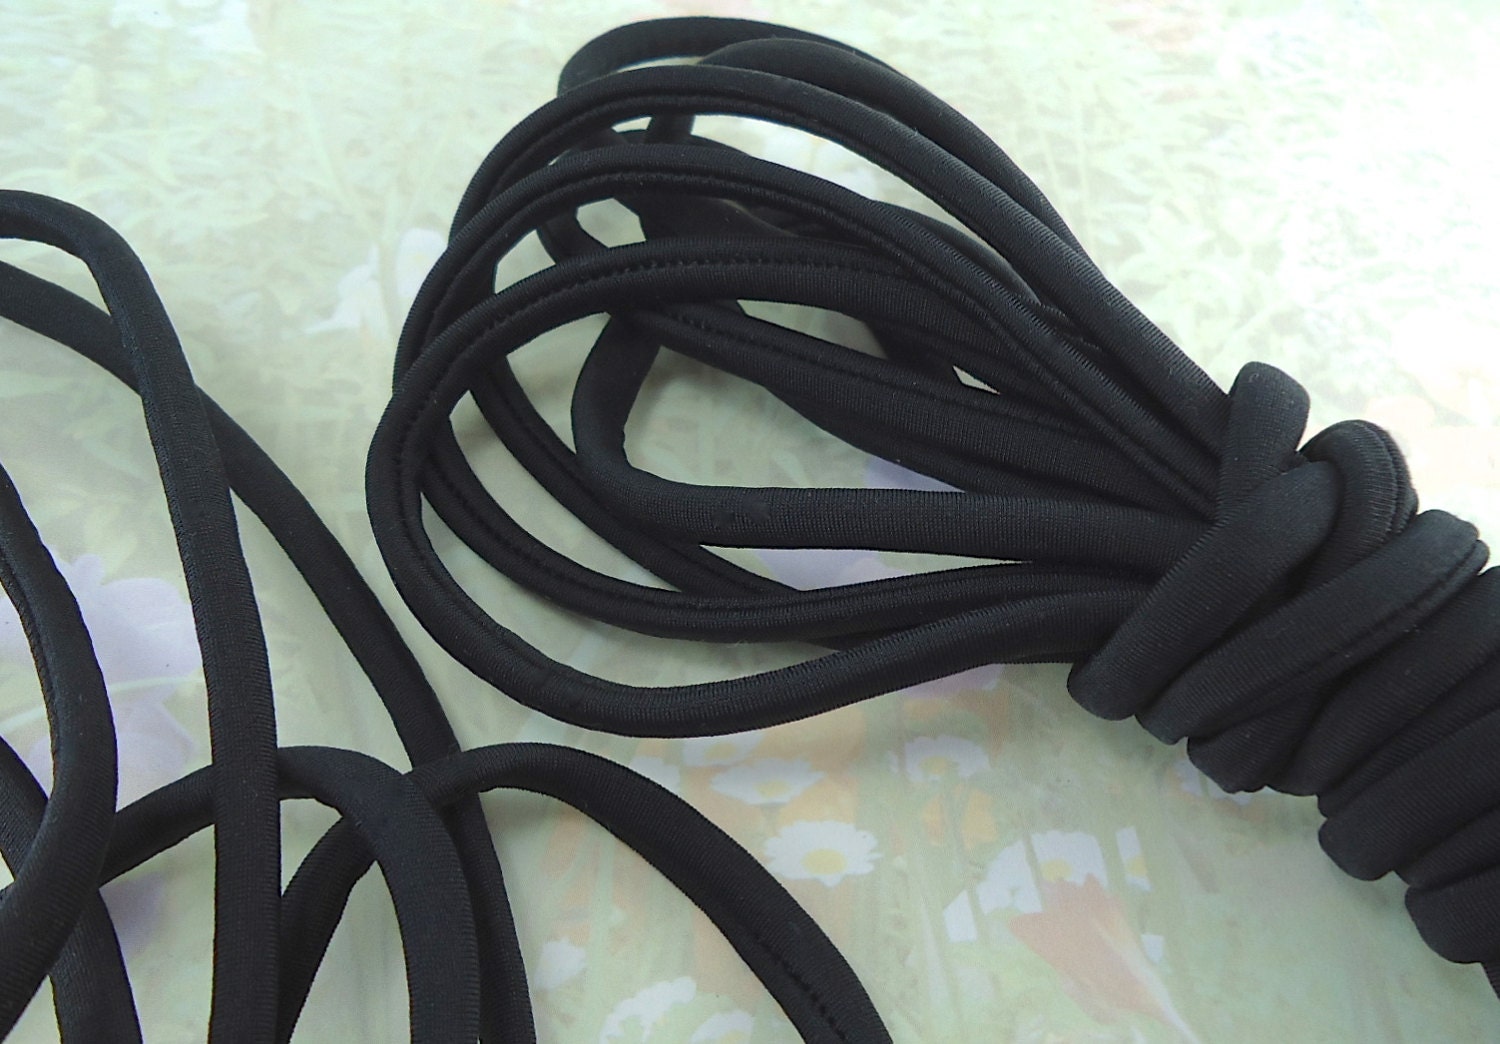 3 yds Satin Black Bias Cord Piping Fabric for bating suit